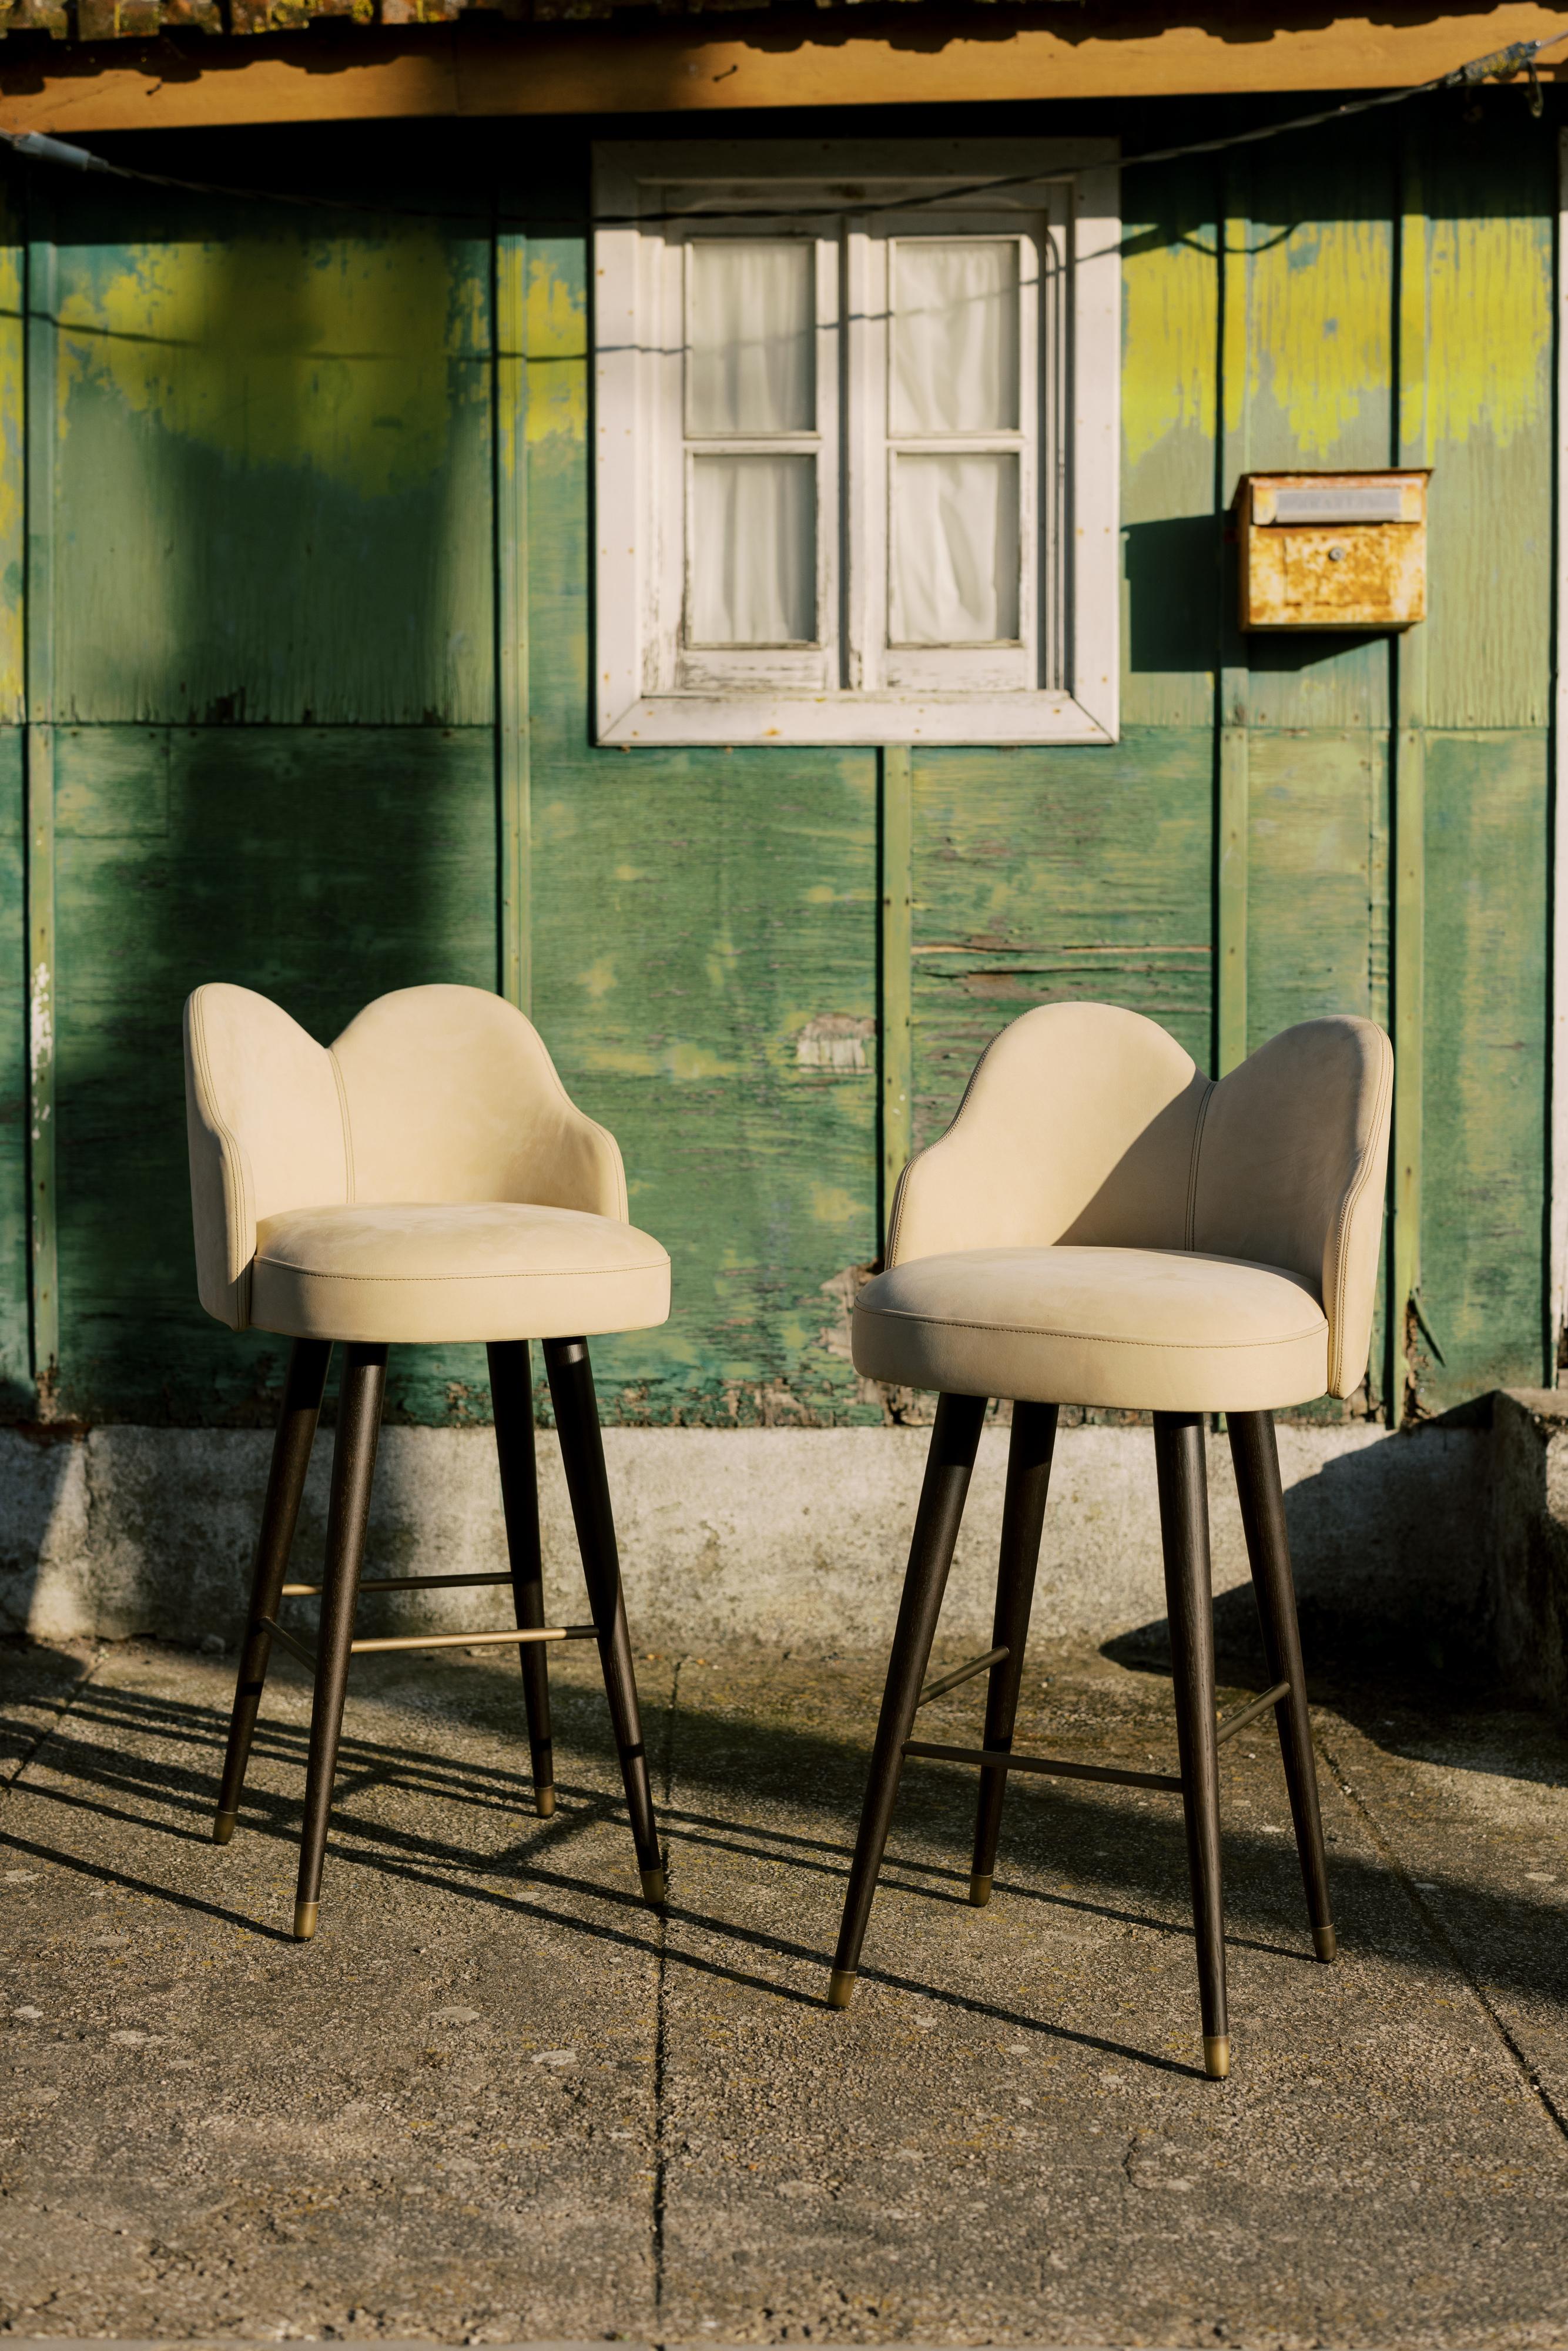 Mary Swivel Bar Stool, Contemporary Collection, Handcrafted in Portugal - Europe by Greenapple.

Designed by Rute Martins for the Contemporary Collection, The Mary bar stool transcends the ordinary through its modern design and fine craftsmanship.